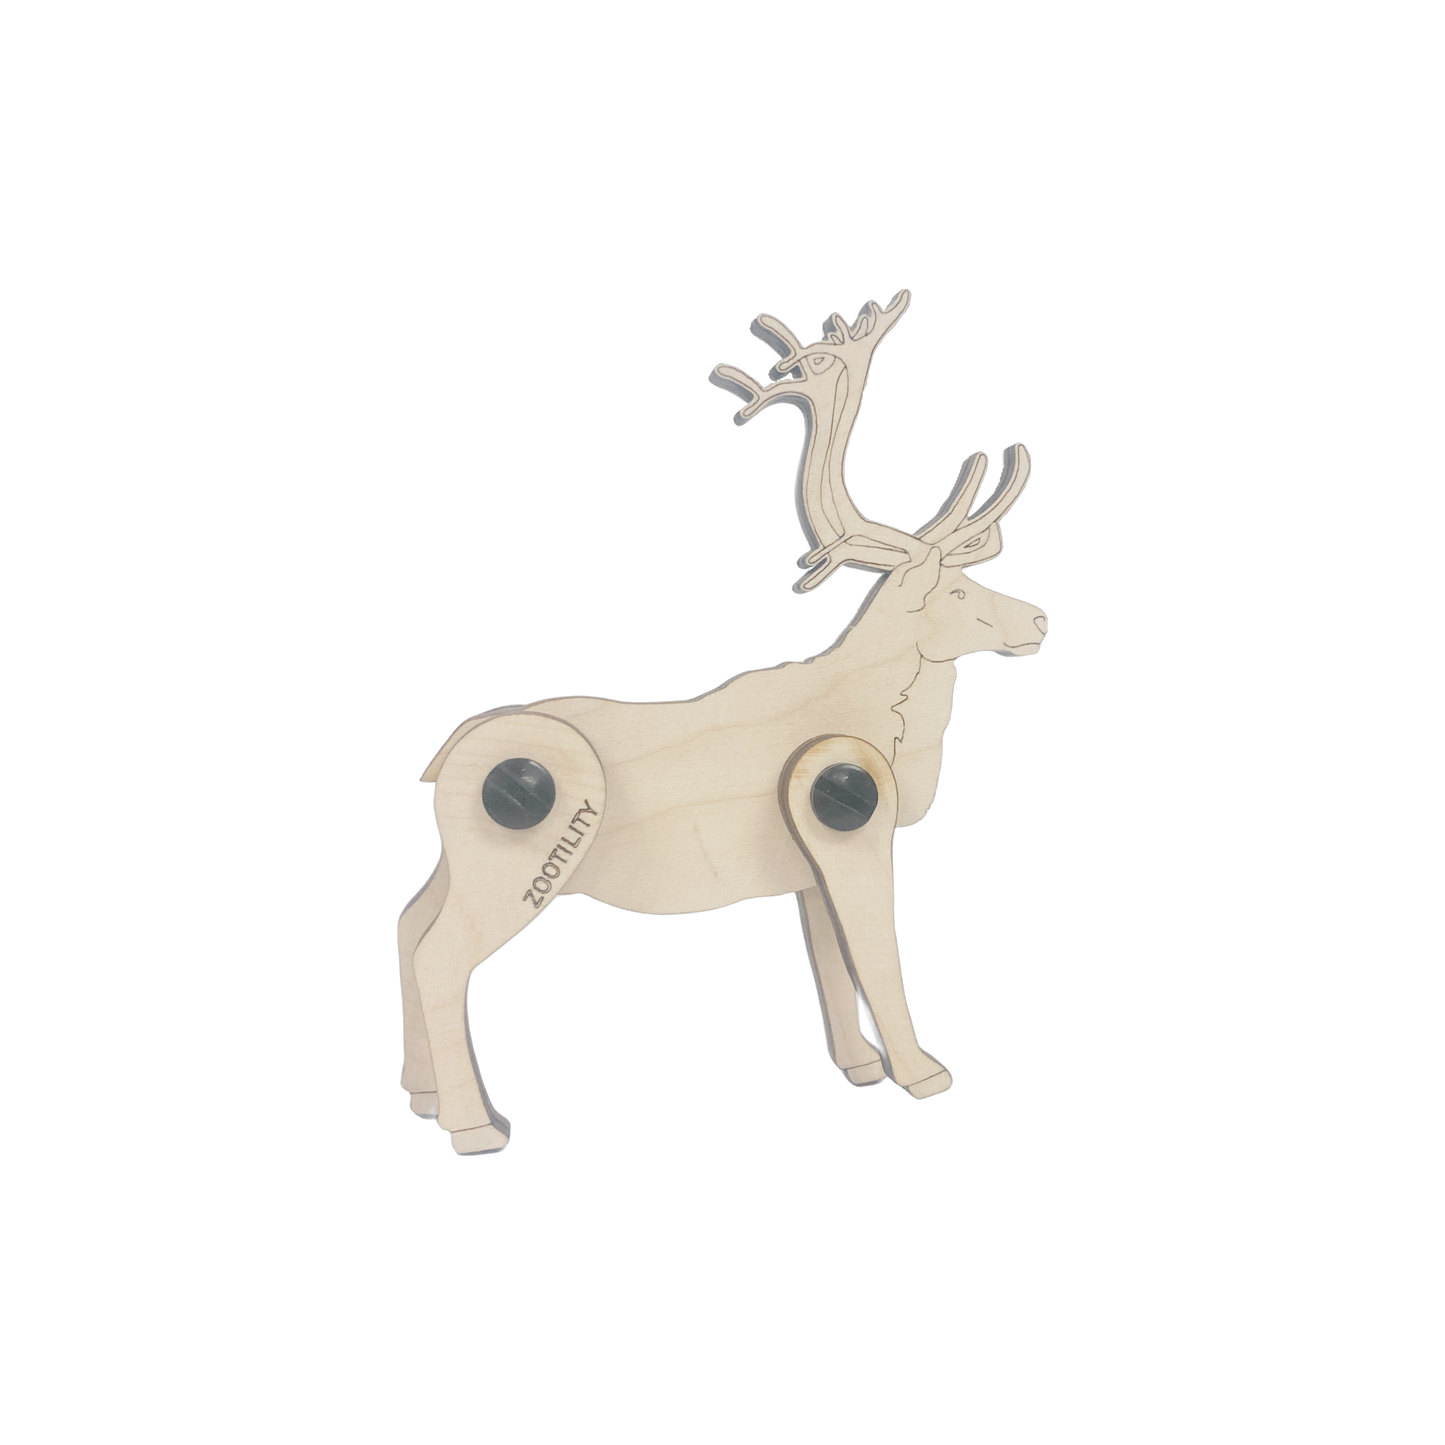 Wooden 3D Puzzle Toy - Mountain: Reindeer